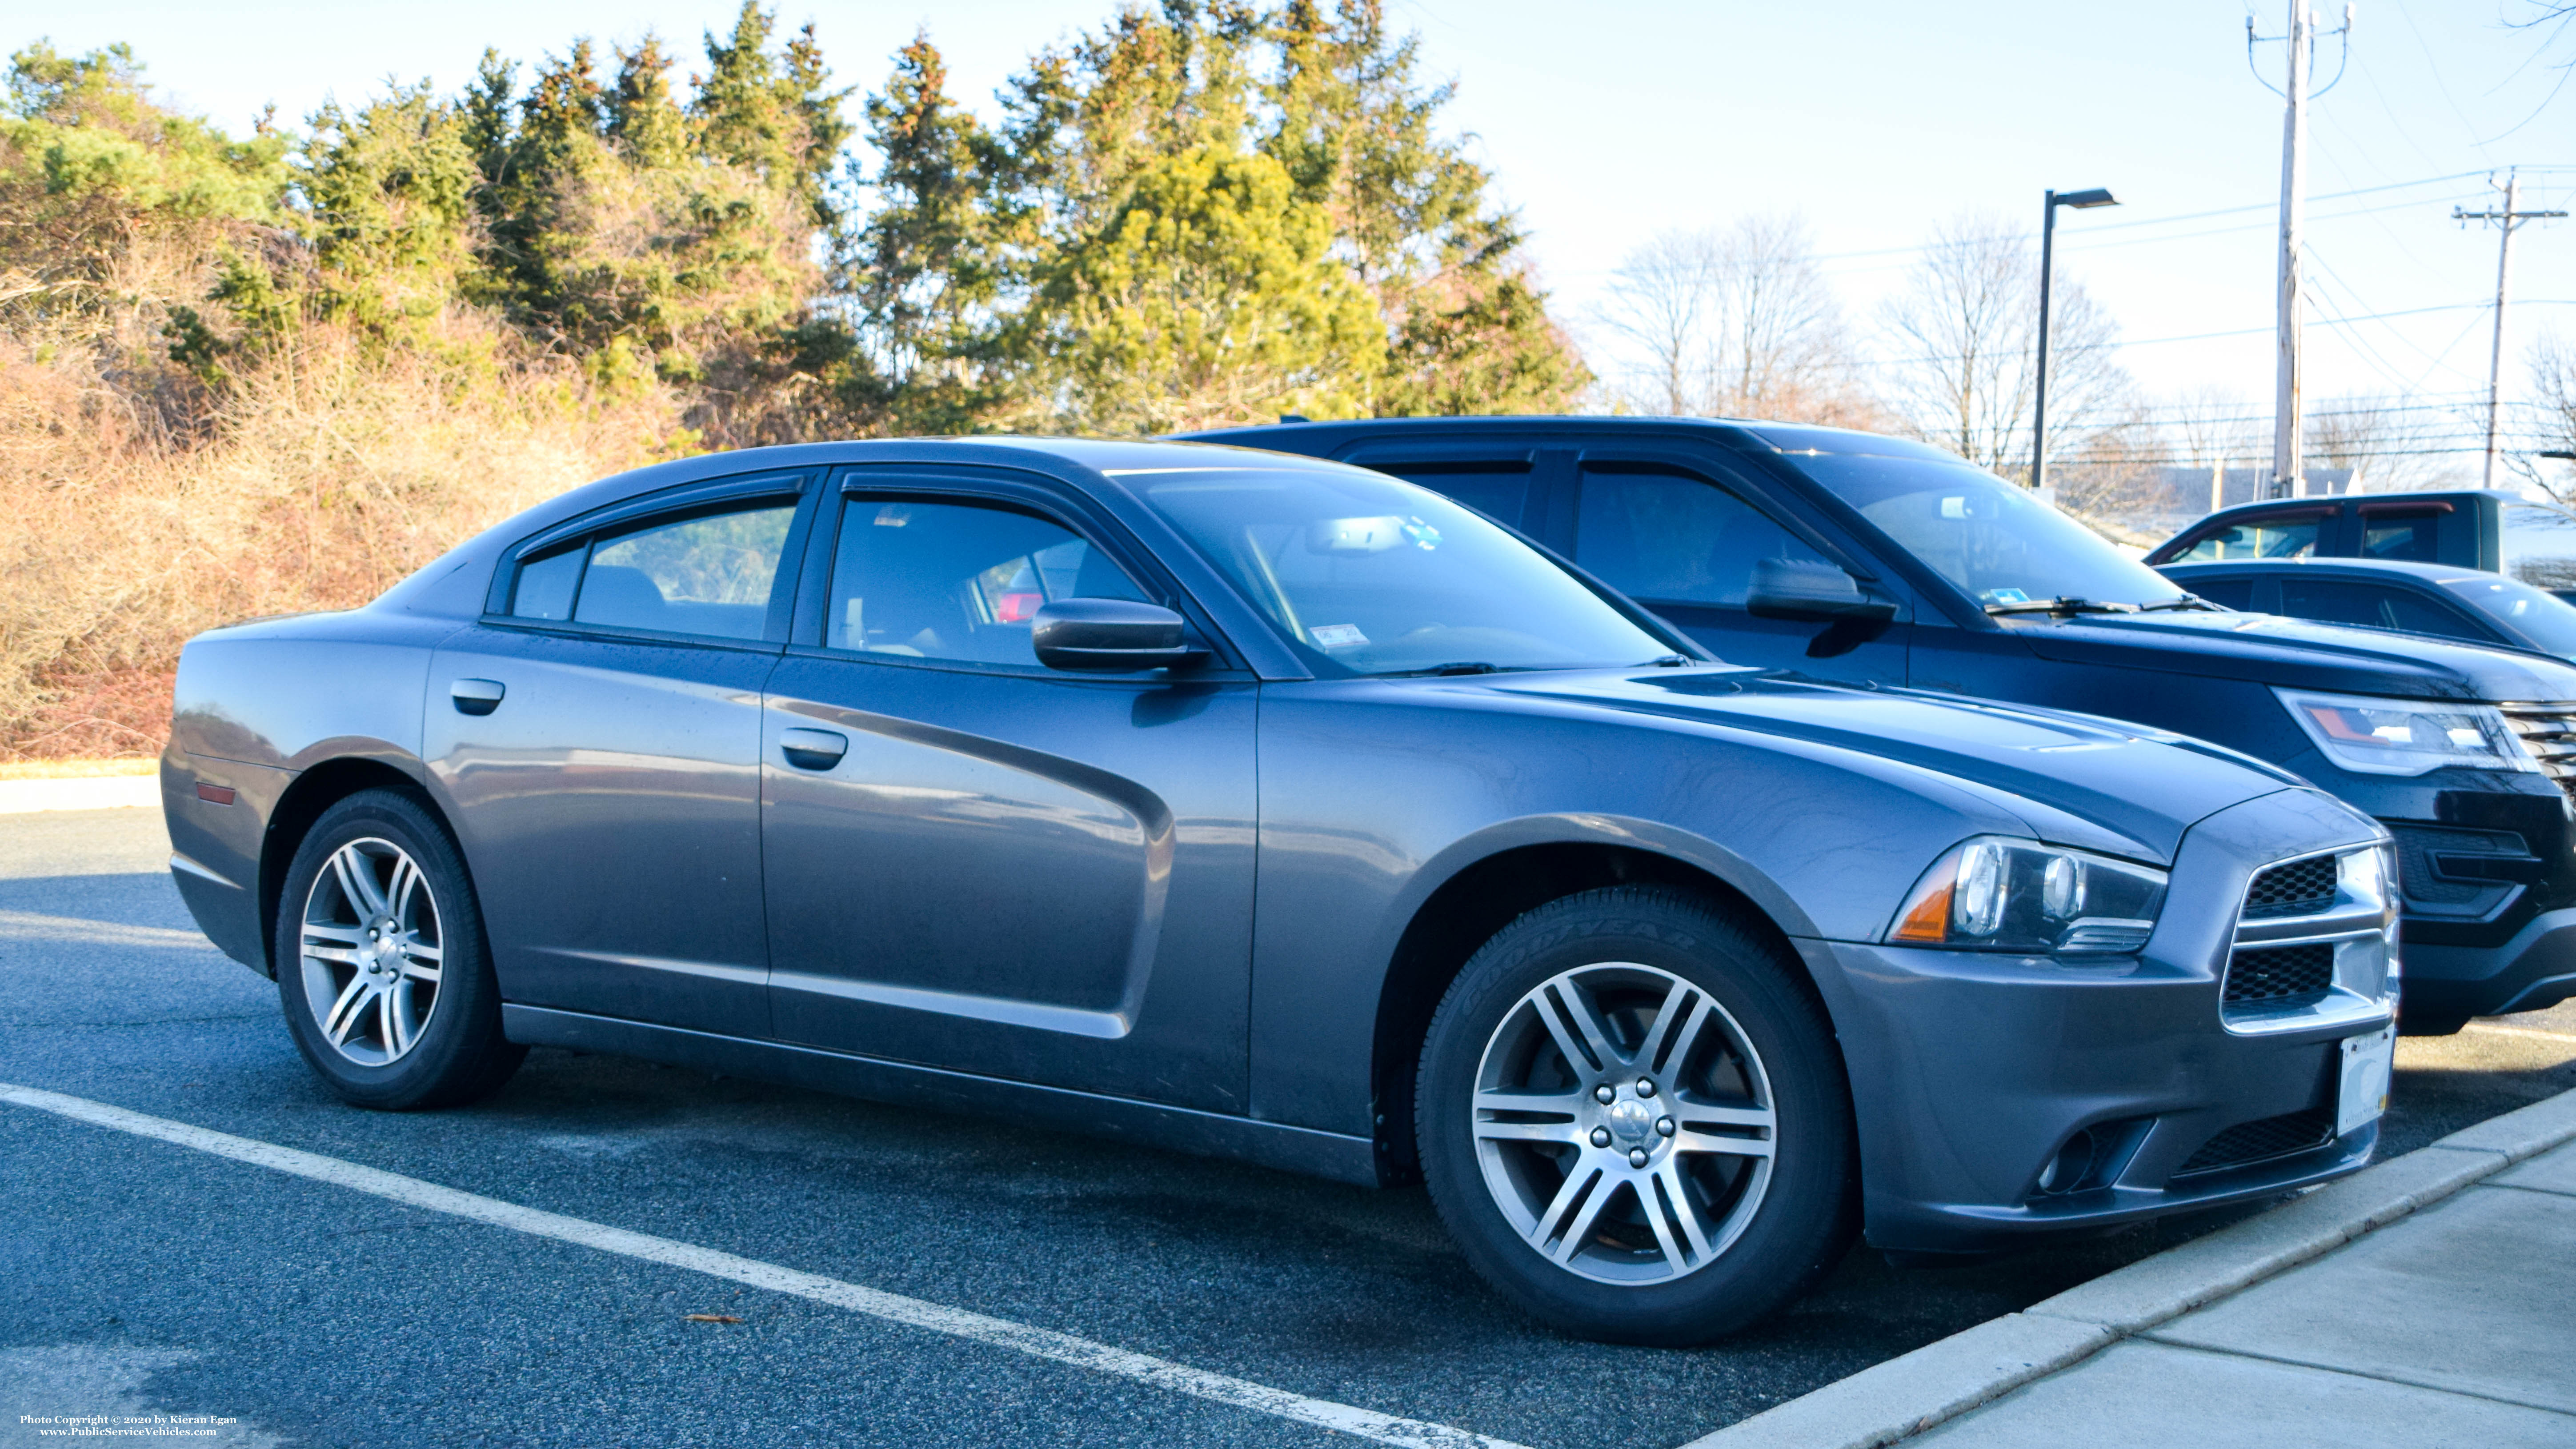 A photo  of Middletown Police
            Cruiser 594, a 2013 Dodge Charger             taken by Kieran Egan